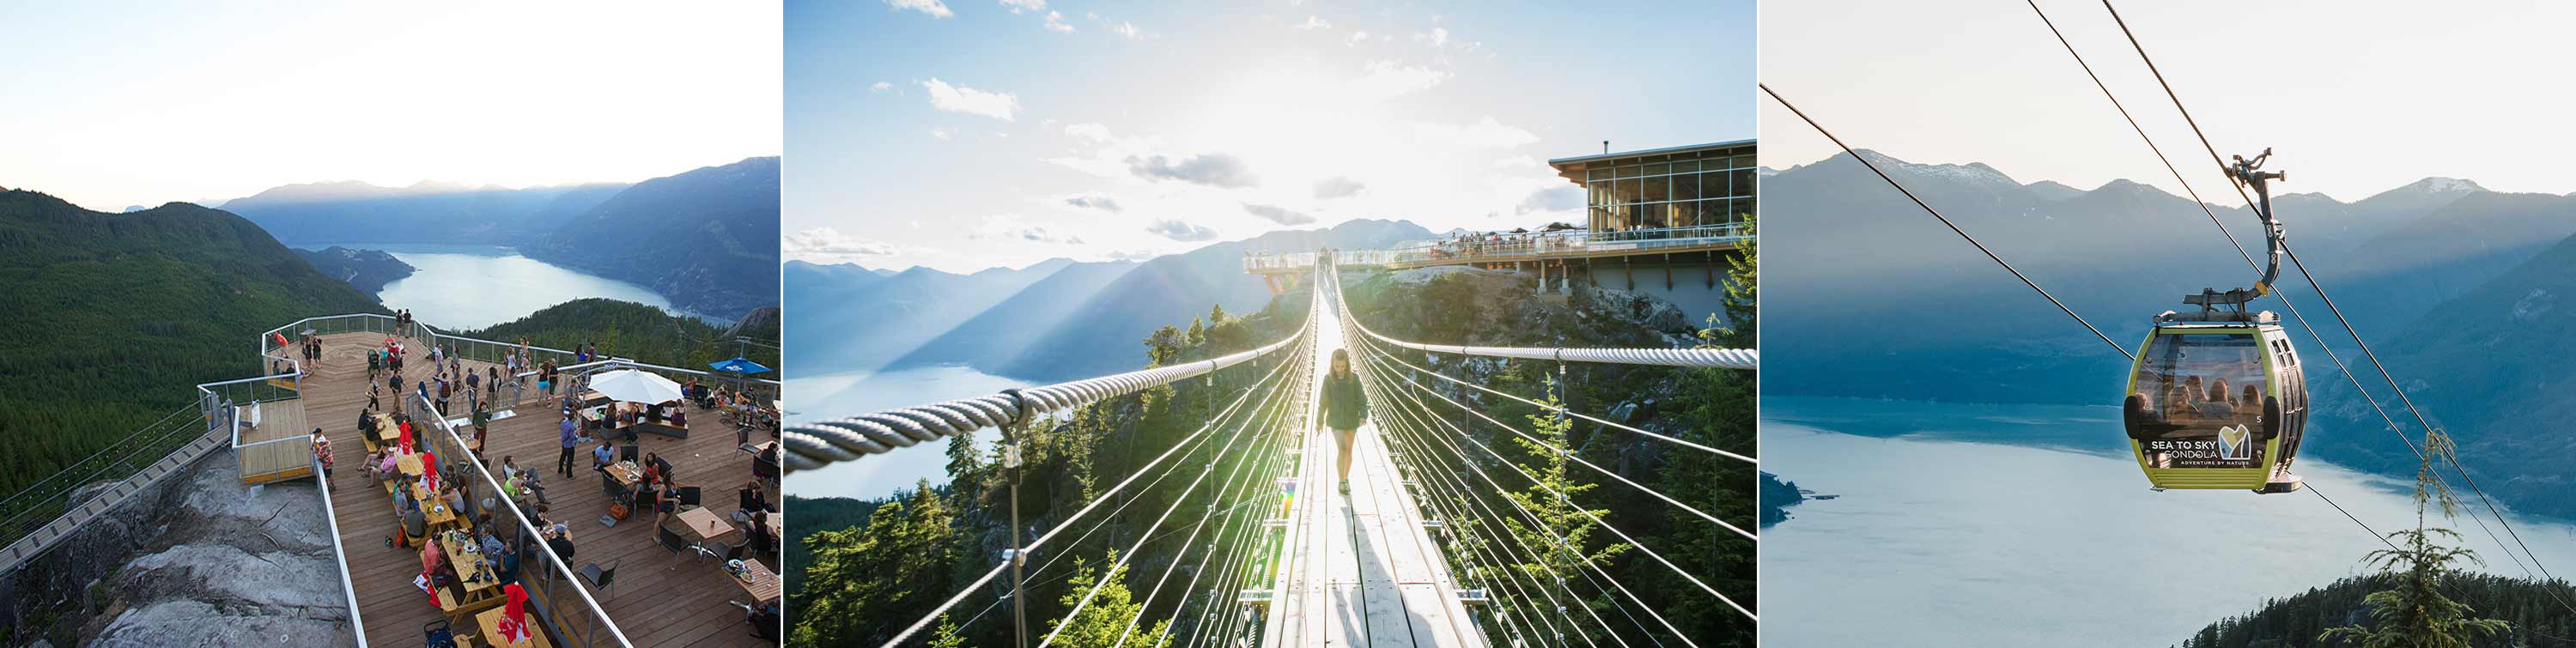 Vancouver's Sea to Sky Gondola: The Complete Guide